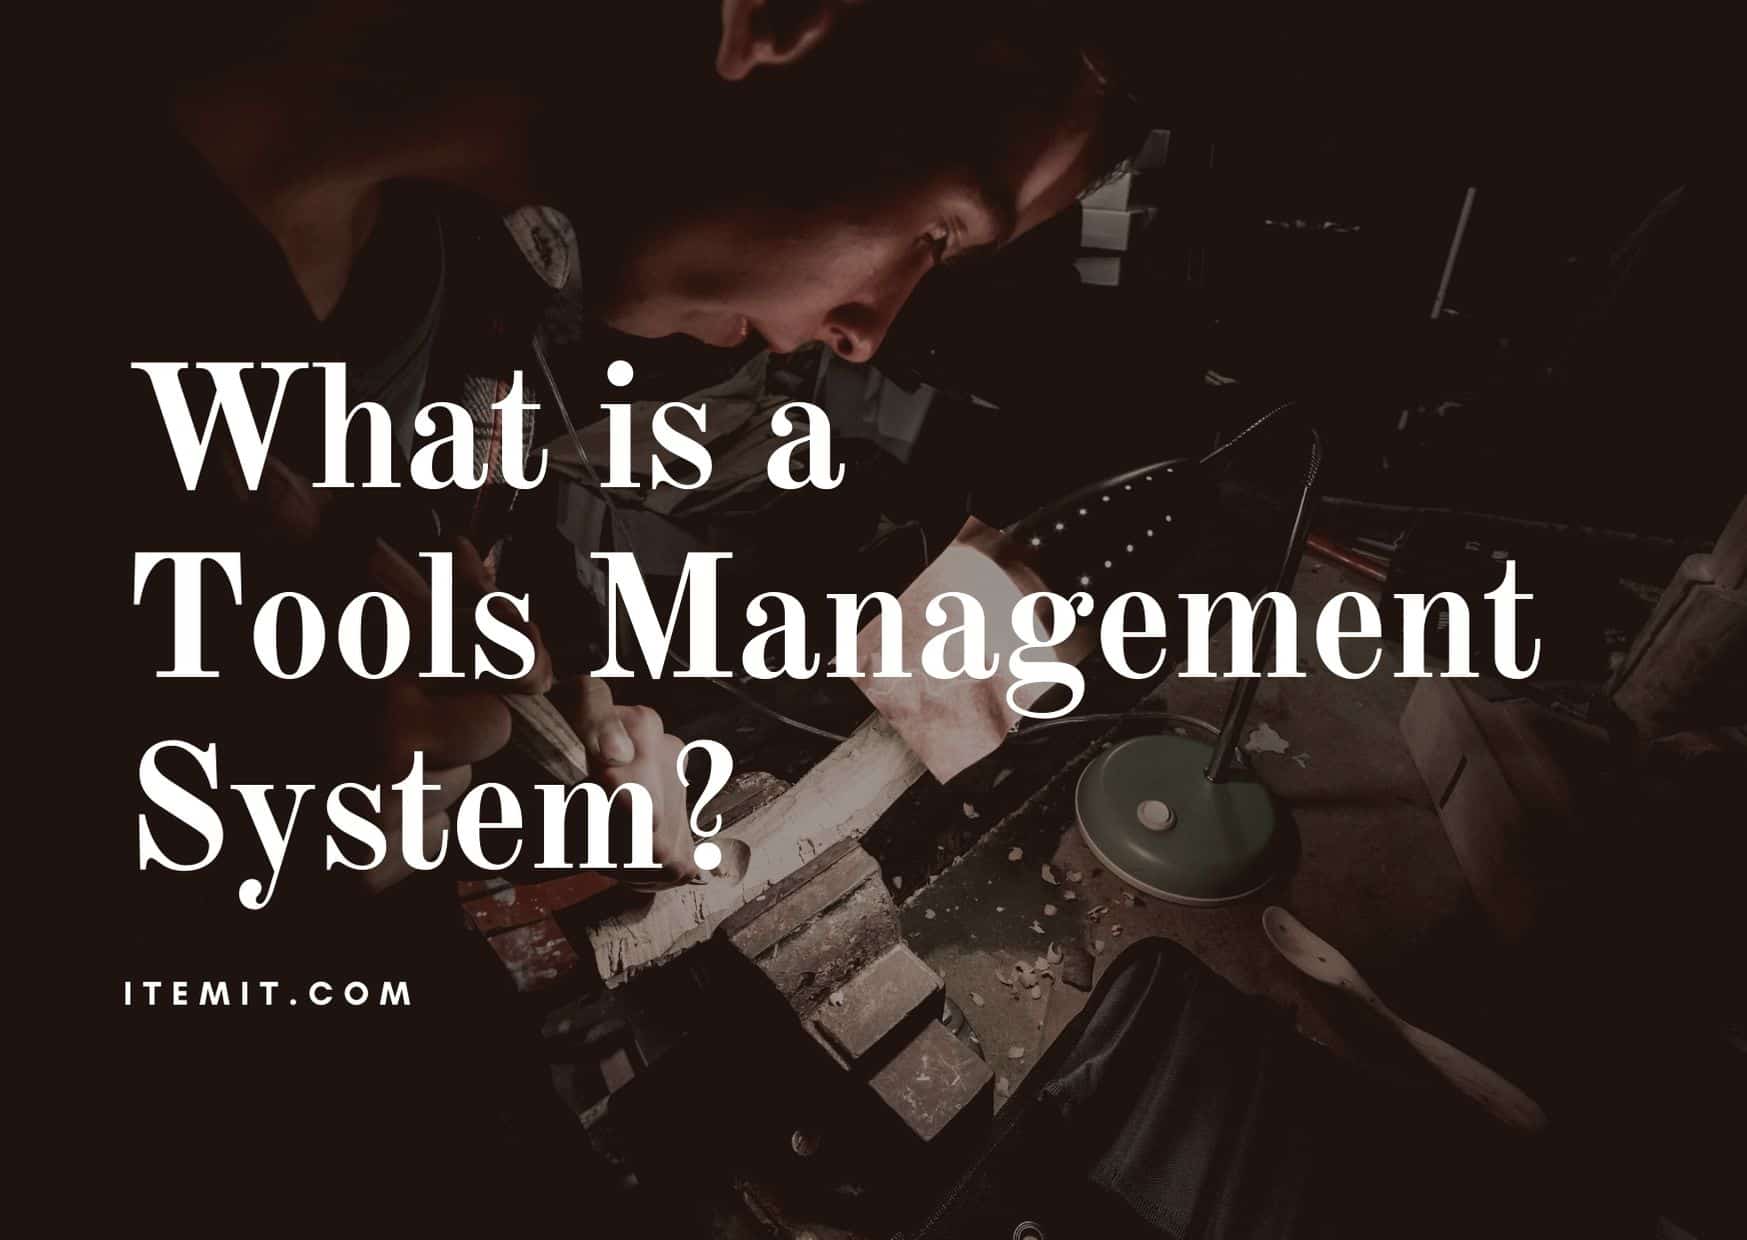 tool tracking and what is a tools management system?